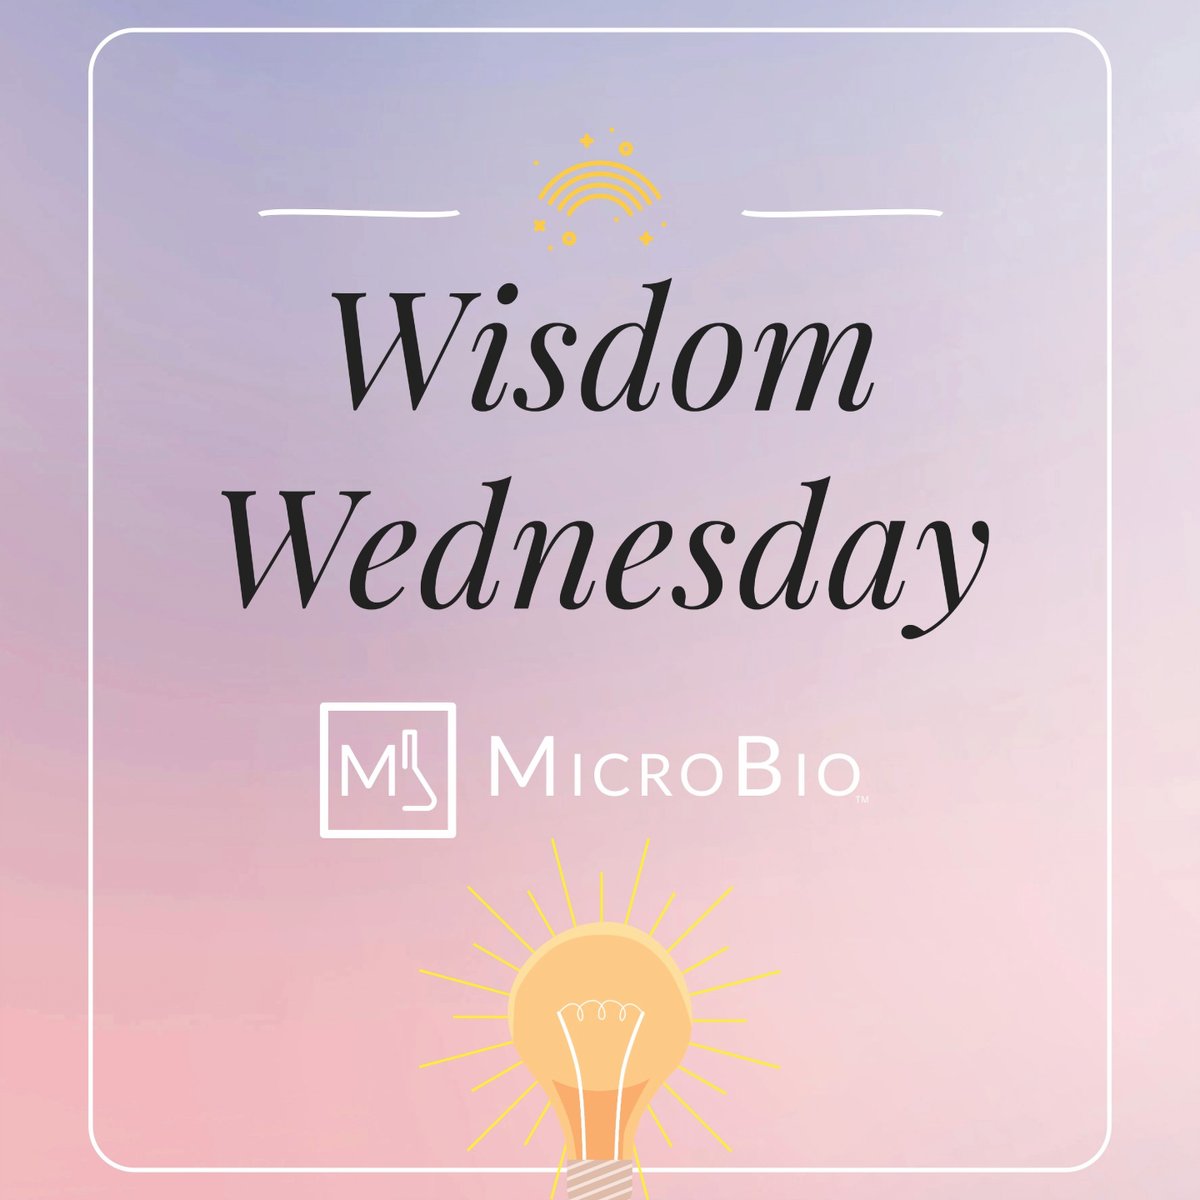 'In science, there are no shortcuts to truth.' - Carl Sagan. 

#Science #Microbiology #CarlSagan #Wisdom #Biocompatibility #Sterilization #Chemistry #Toxicology #LearningAndDevelopment #MicroBioConsulting #MicroBioAcademy

wix.to/w0C6q8h